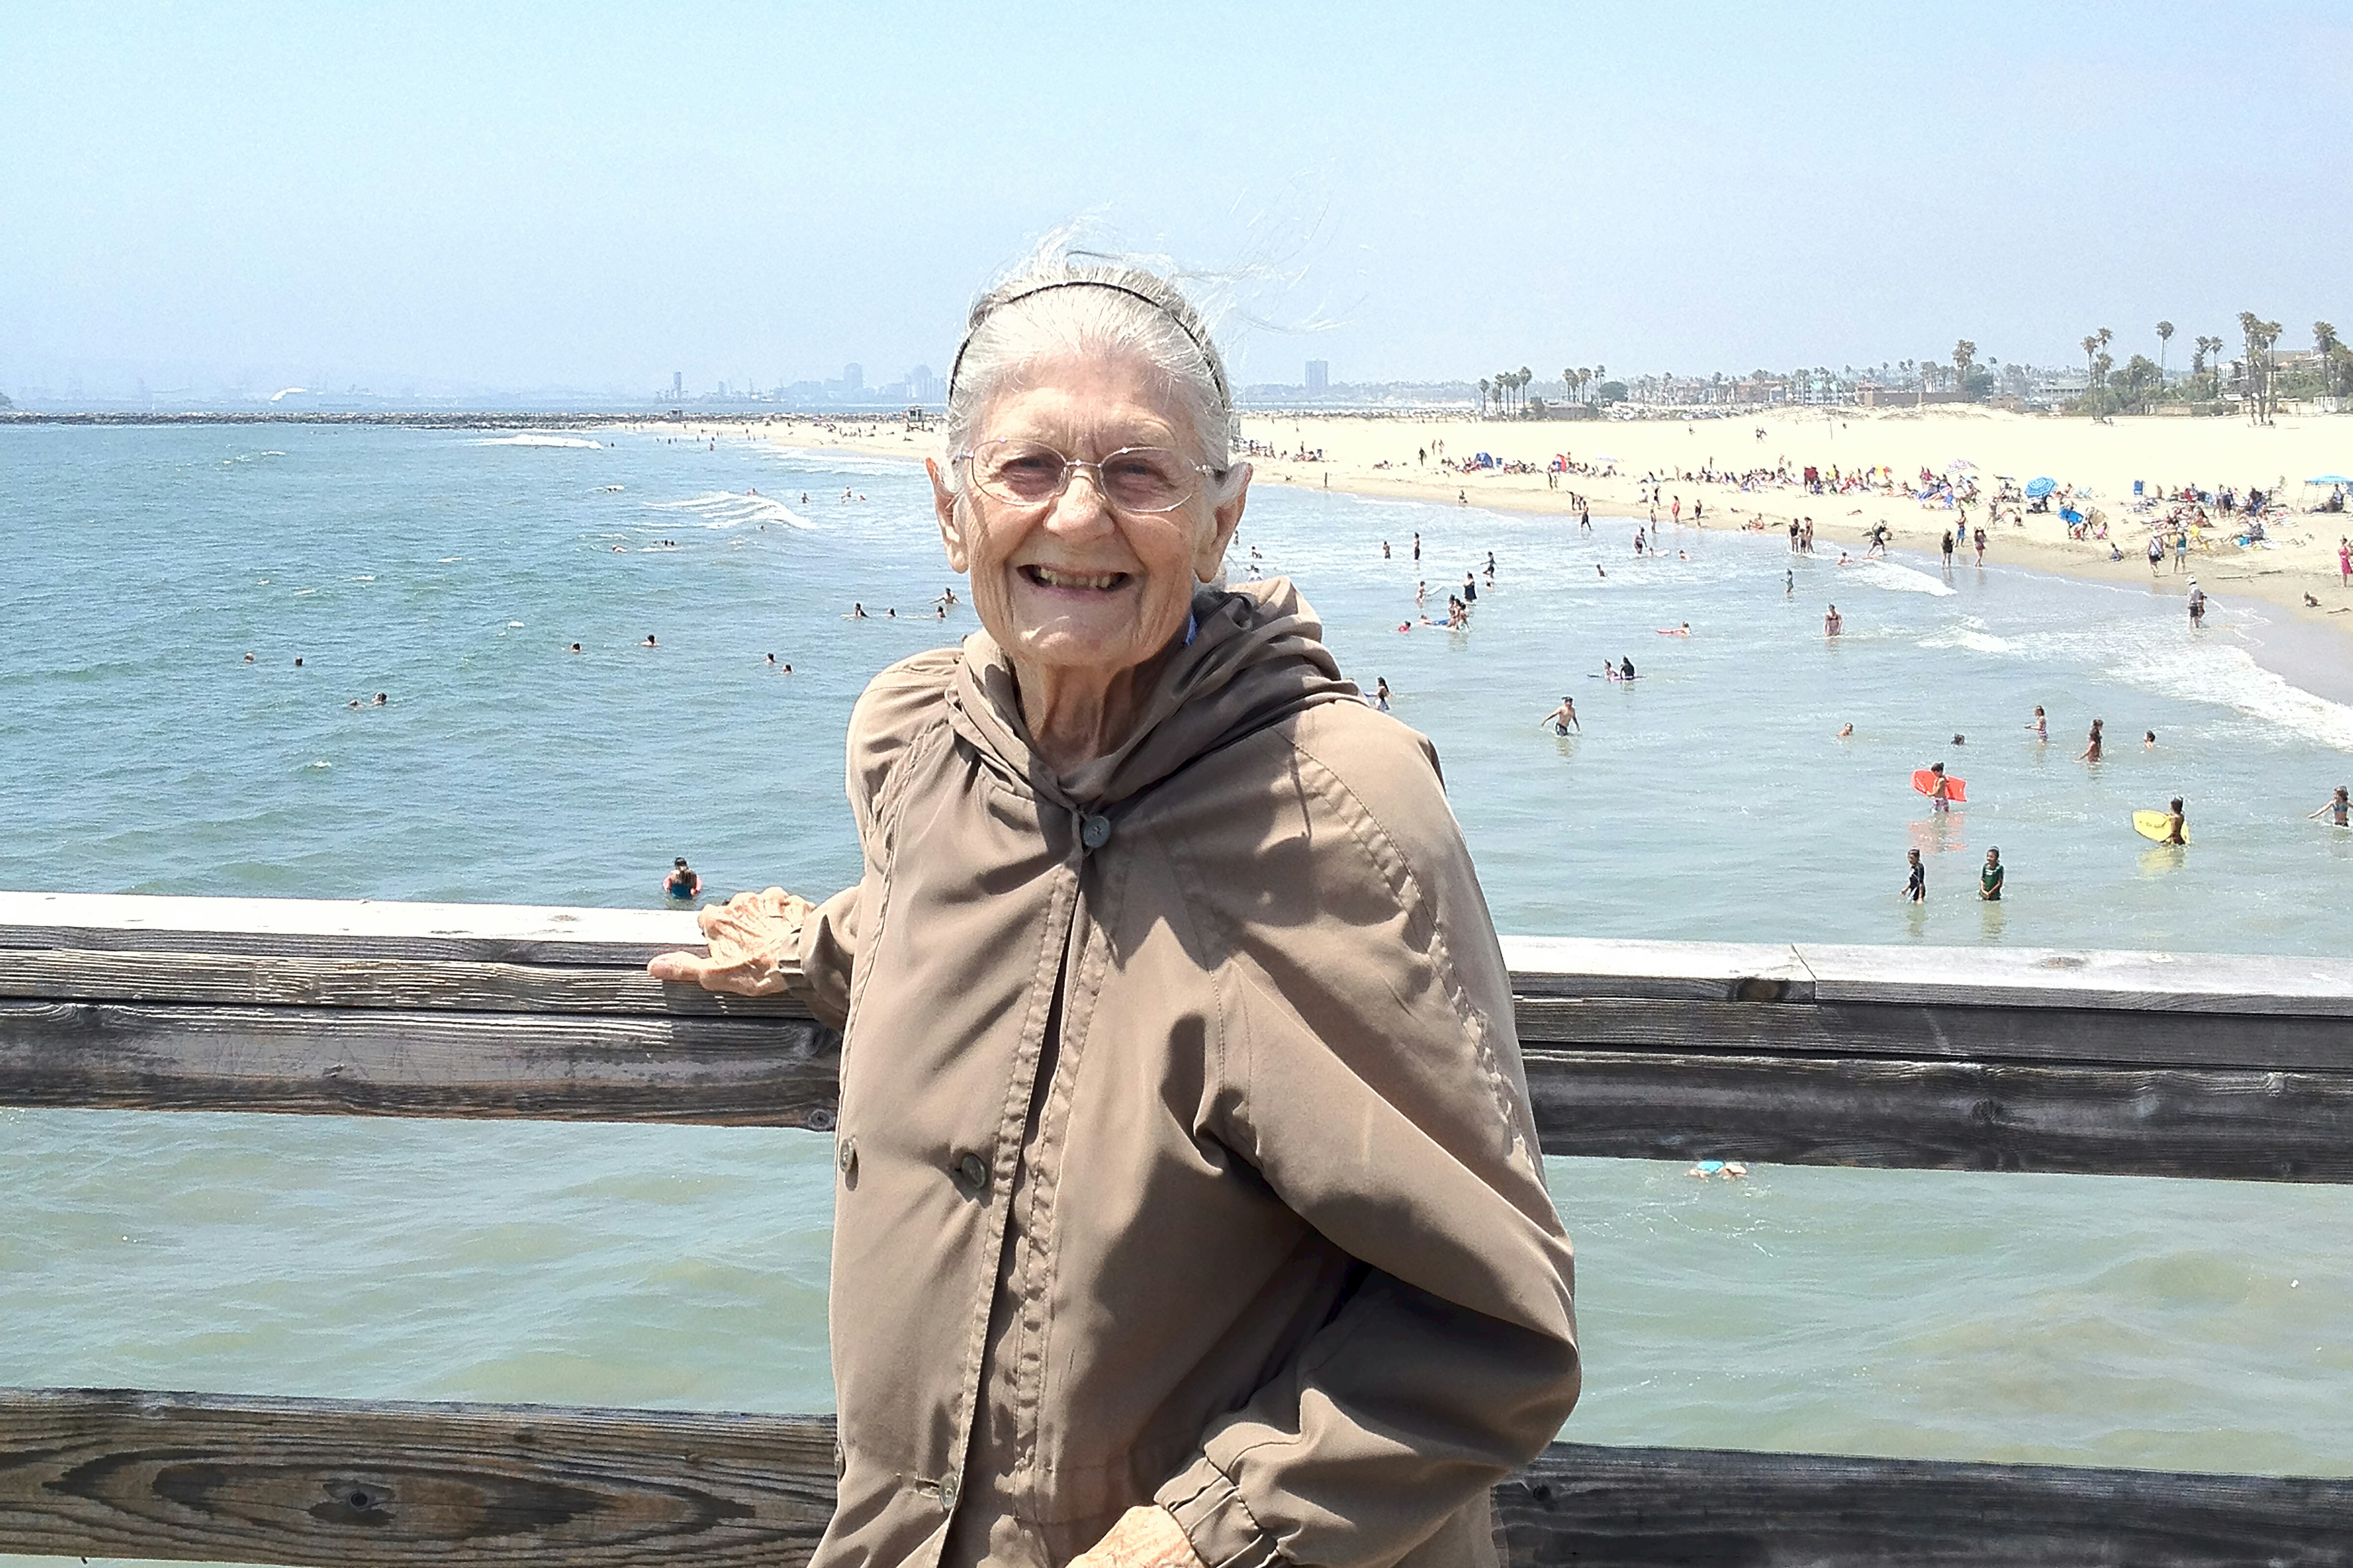 An older woman poses, smiling, at a wooden railing; in the distance behind her, people at the beach.